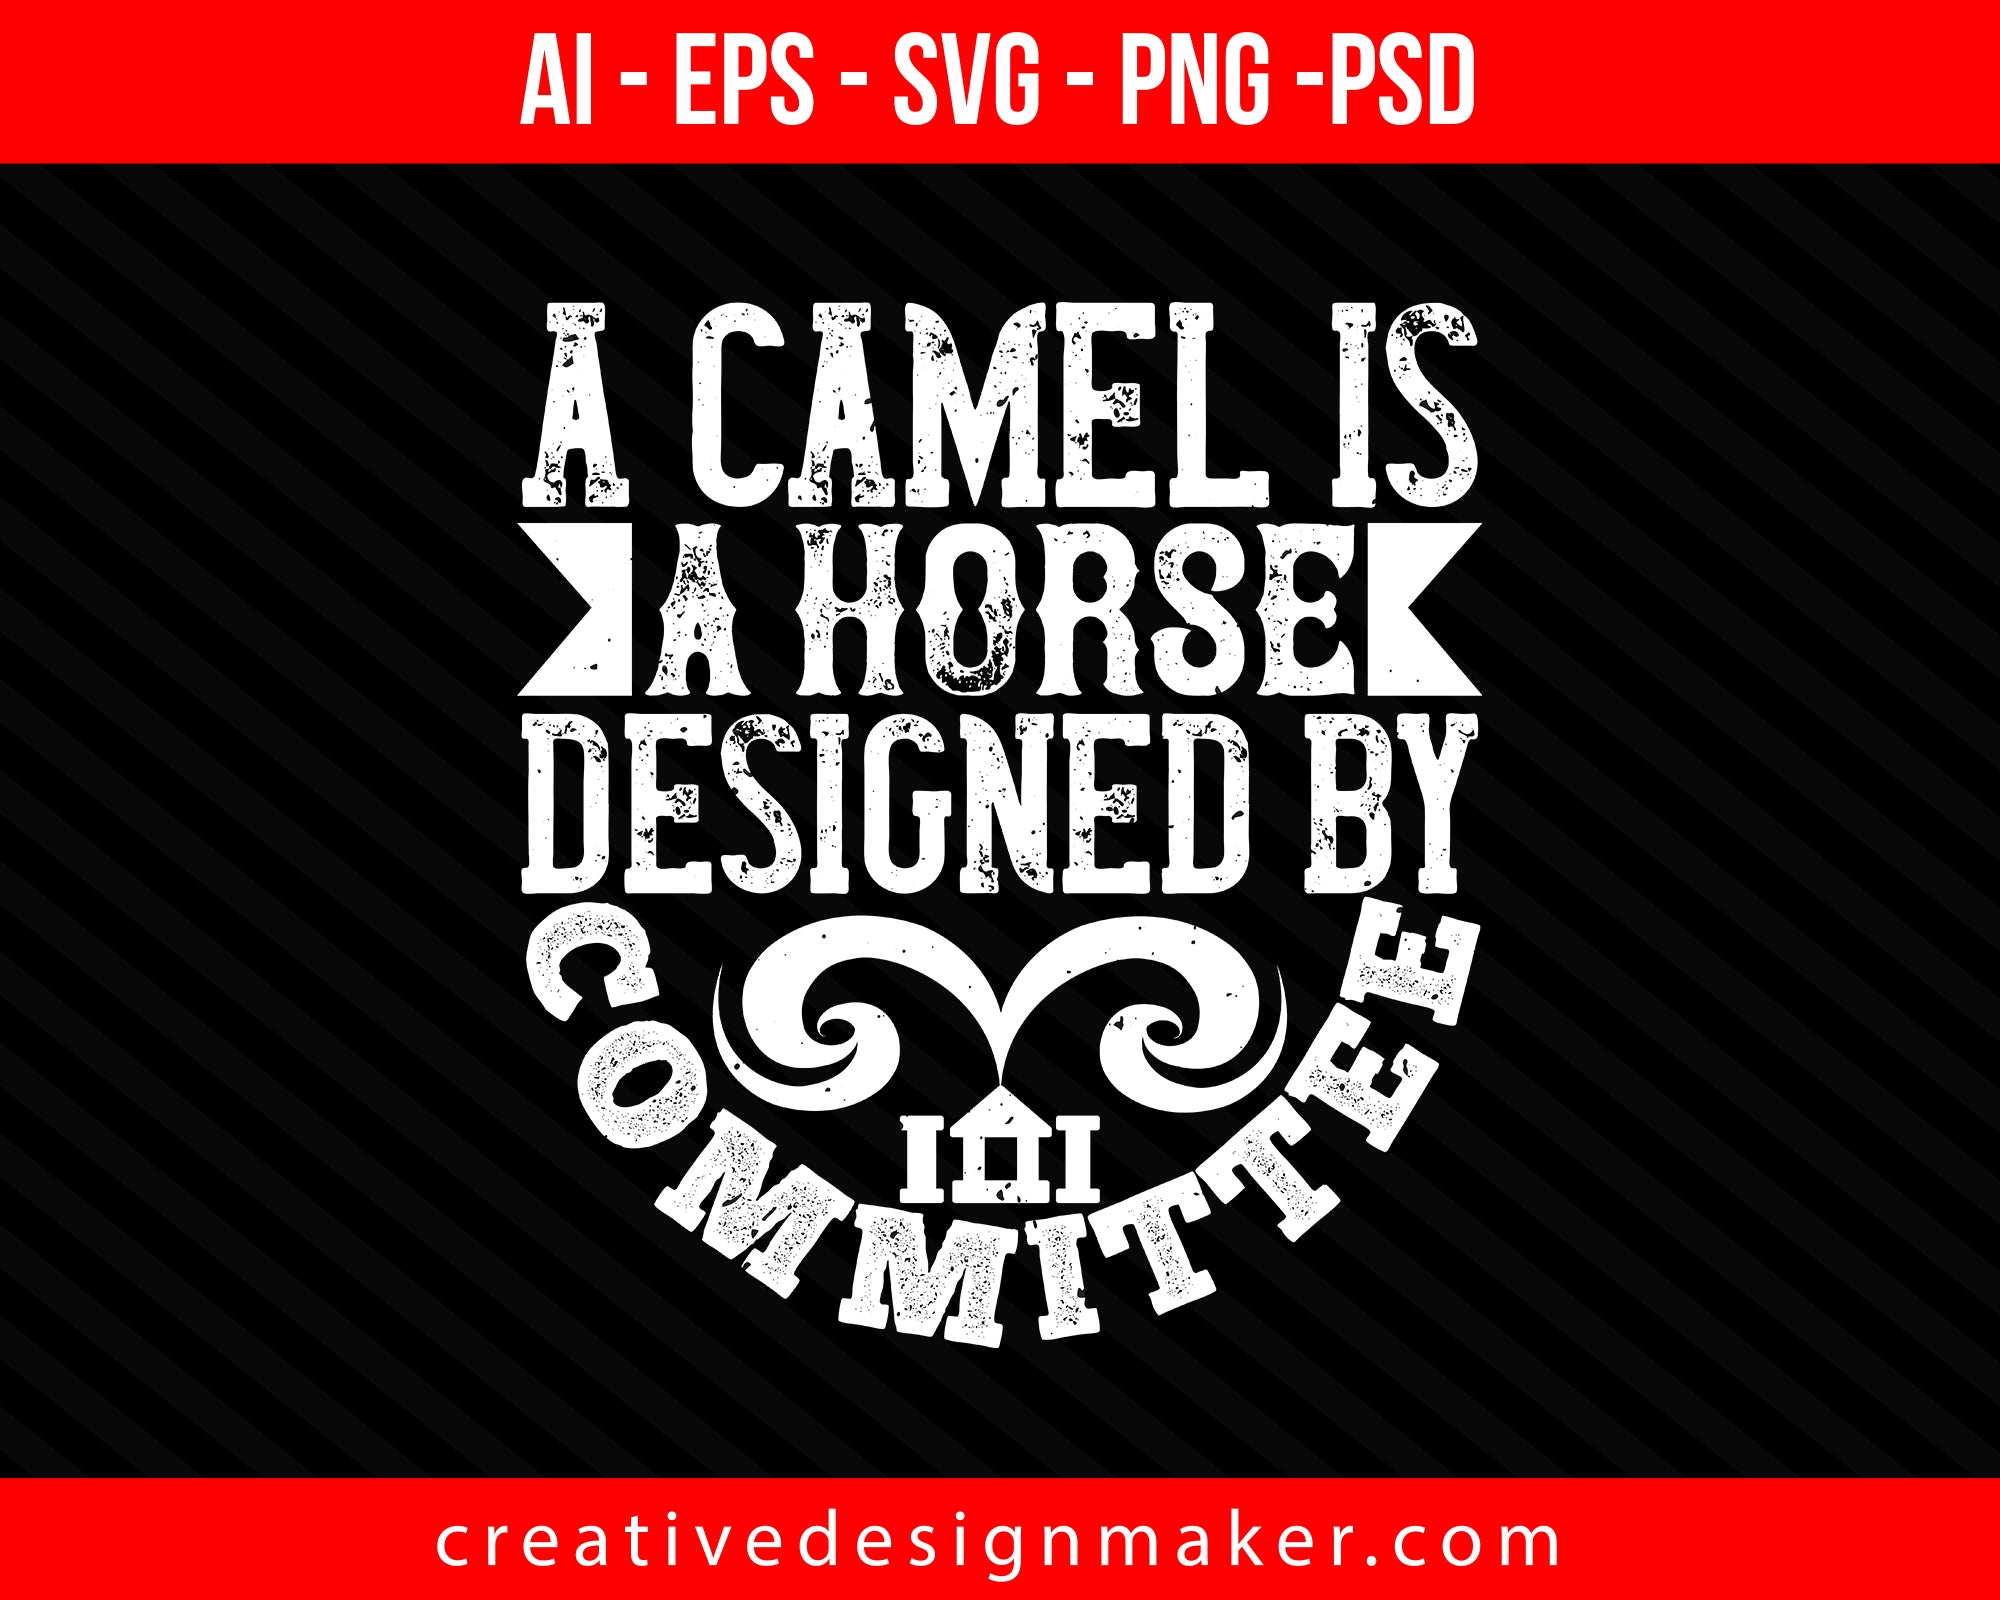 A camel is a horse designed by committee Architect Print Ready Editable T-Shirt SVG Design!